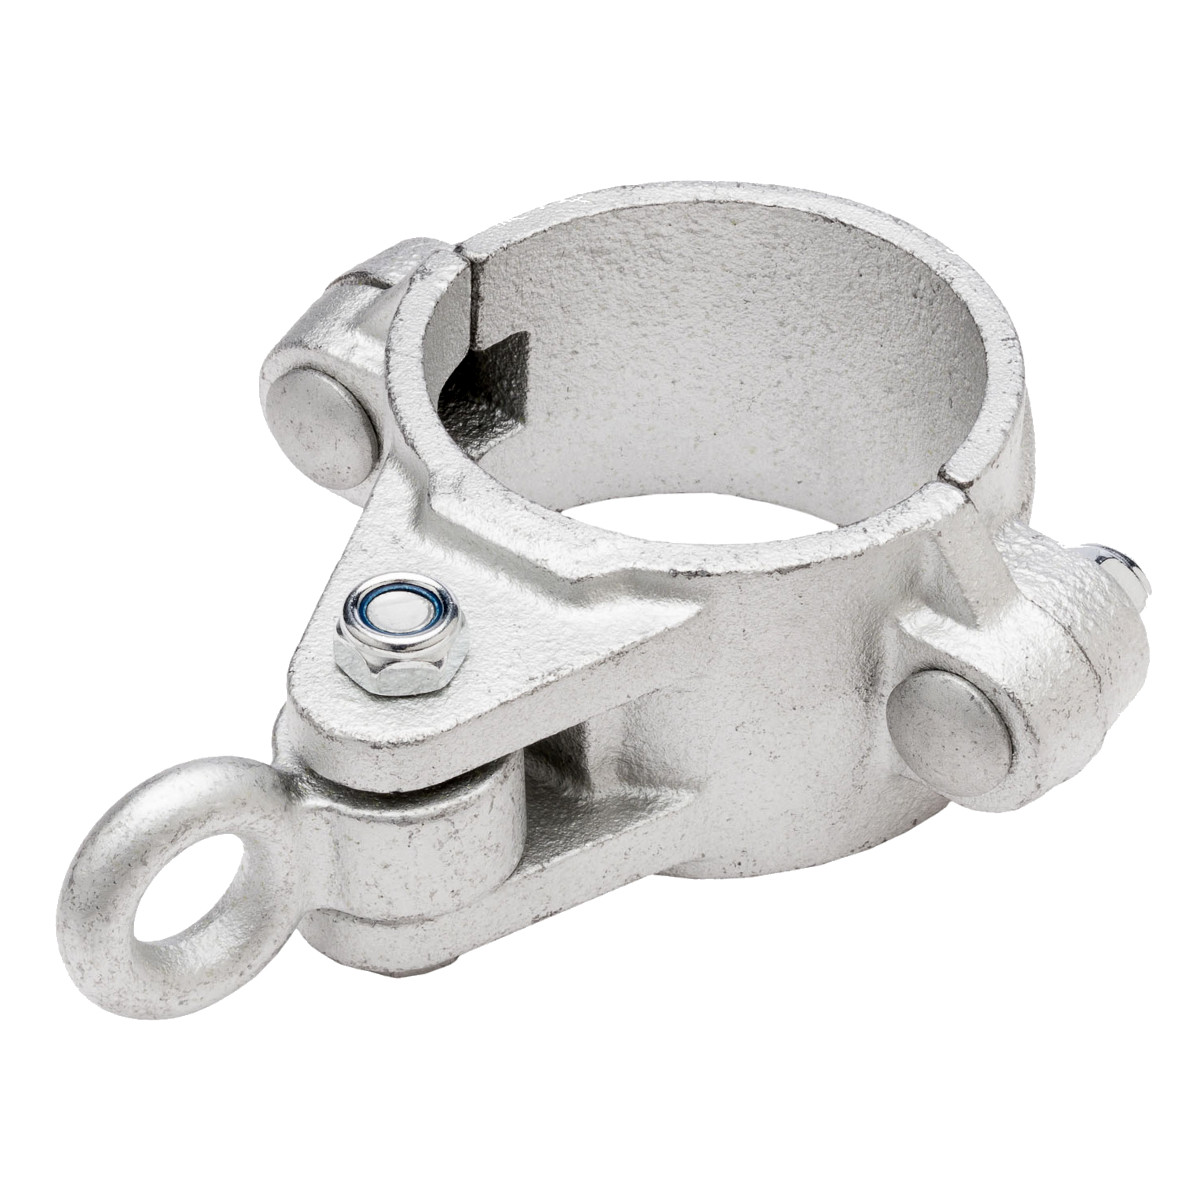 Galvanized Ductile Iron Pipe Beam Swing Hanger with Loop - SH-10